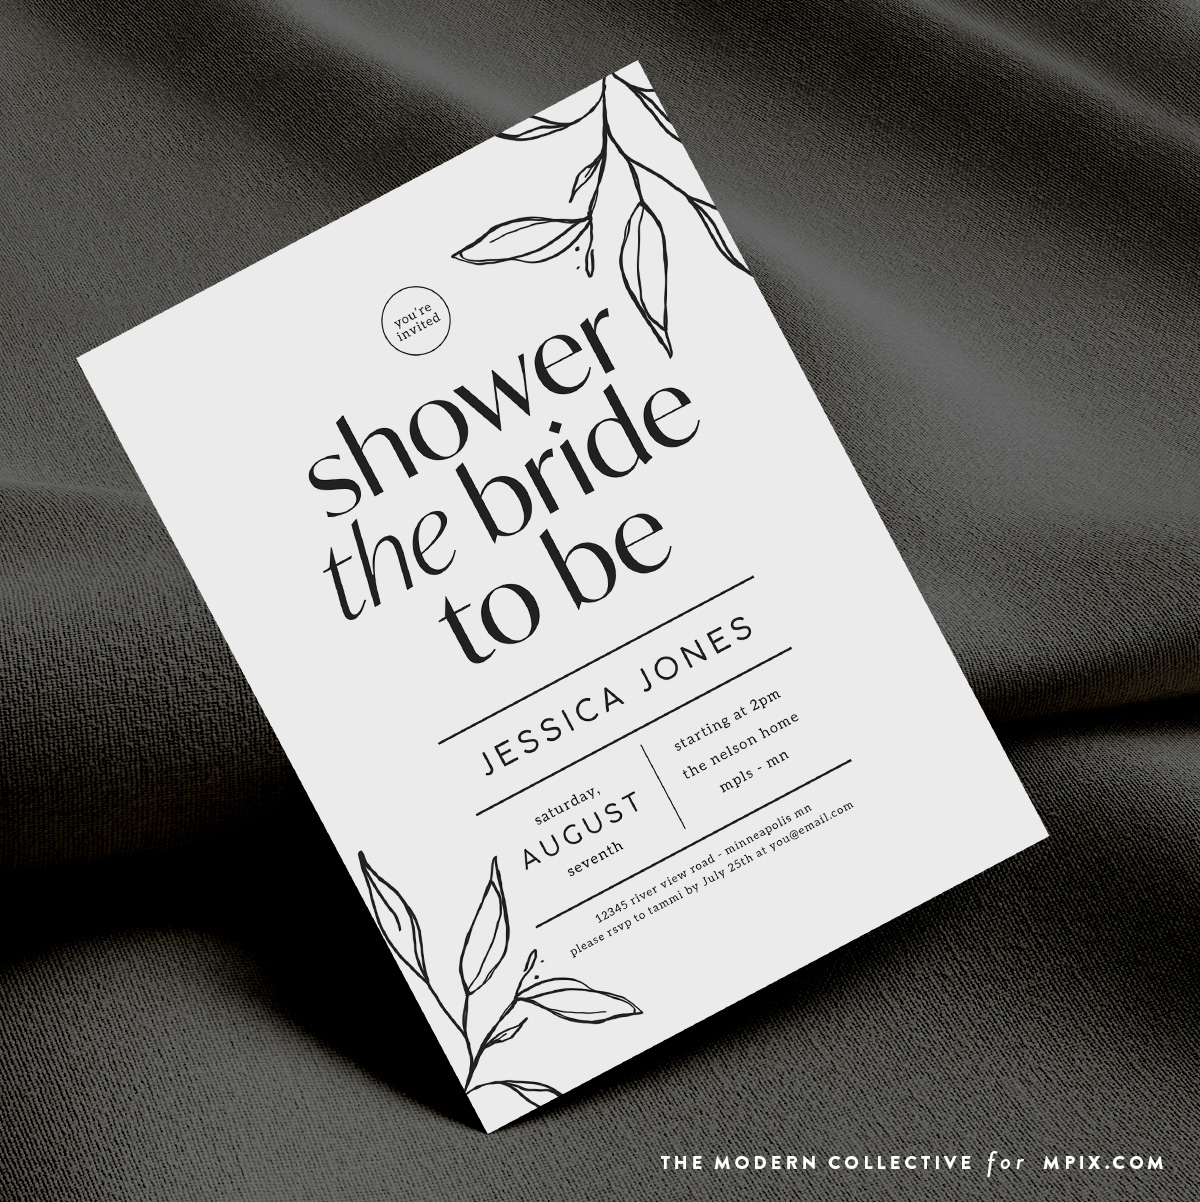 Customizable Bridal Shower Invite from Mpix.com Designed by The Modern Collective